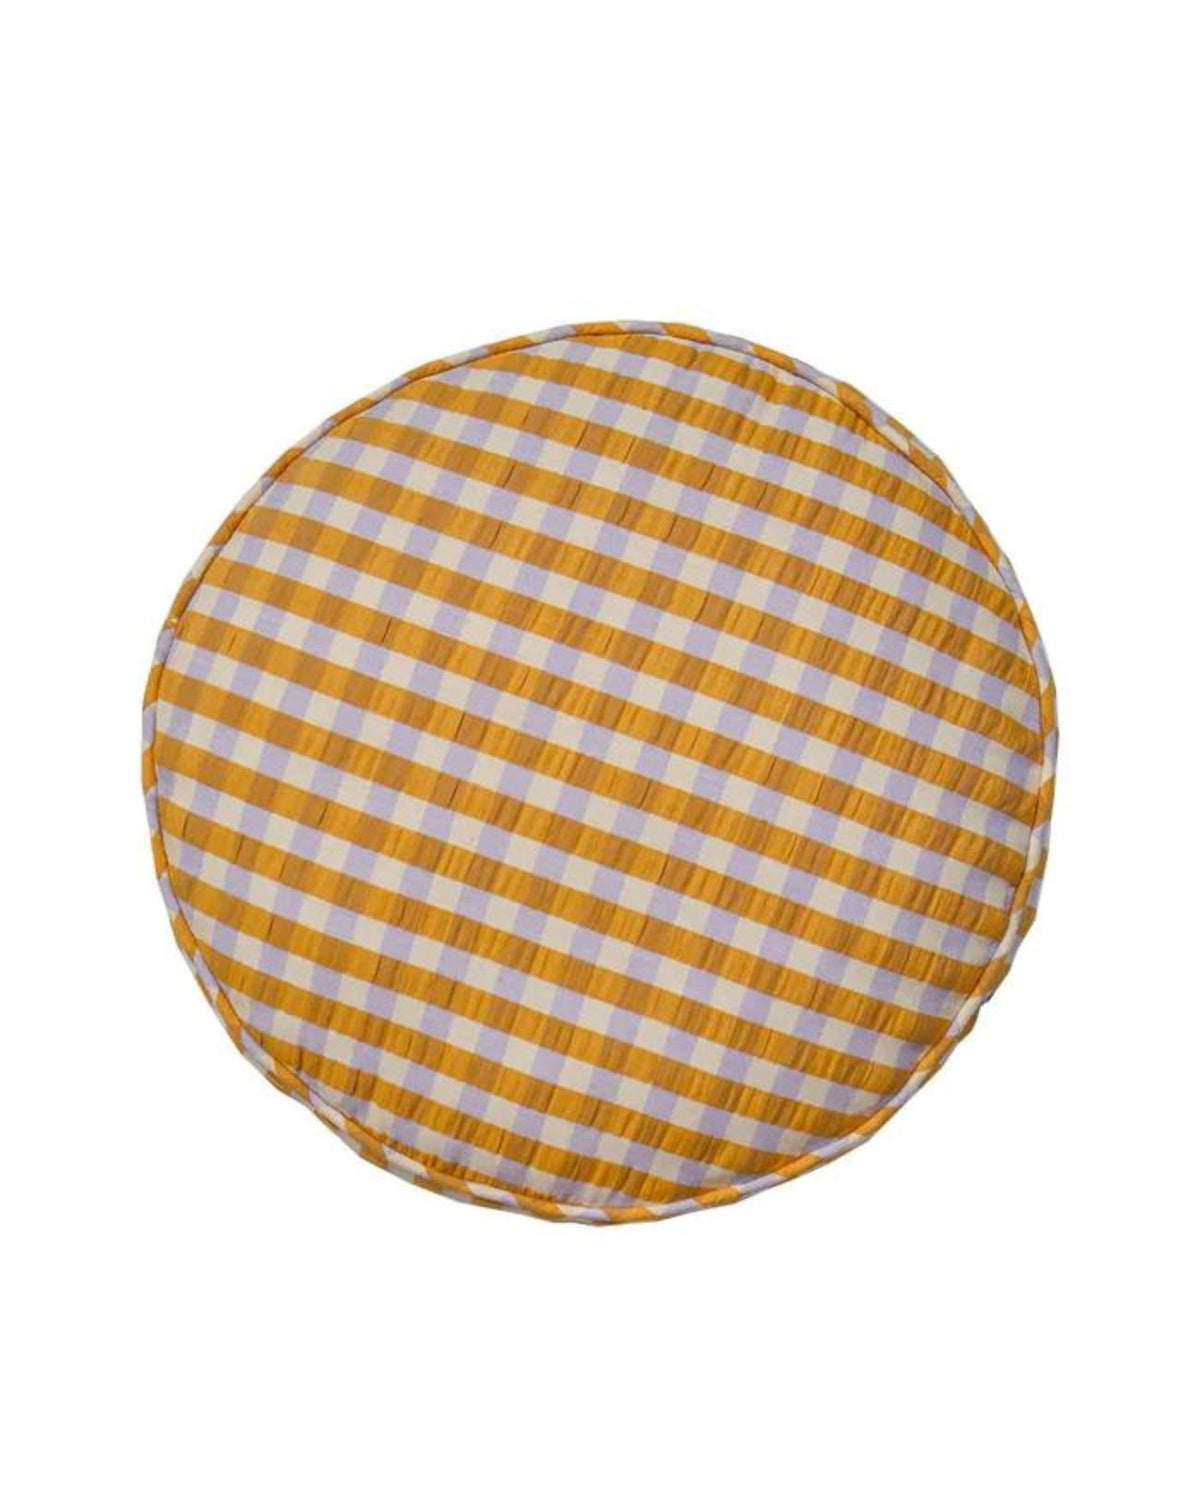 Add an extra layer to your kid's bed with the Mango Seersucker Round Cushion. The mango, lilac and cream colour palette is both warm and calming. Style with our Mango Seersucker duvet set, or layer with our other bedding and decor styles to add depth and dimension to your kids bed.